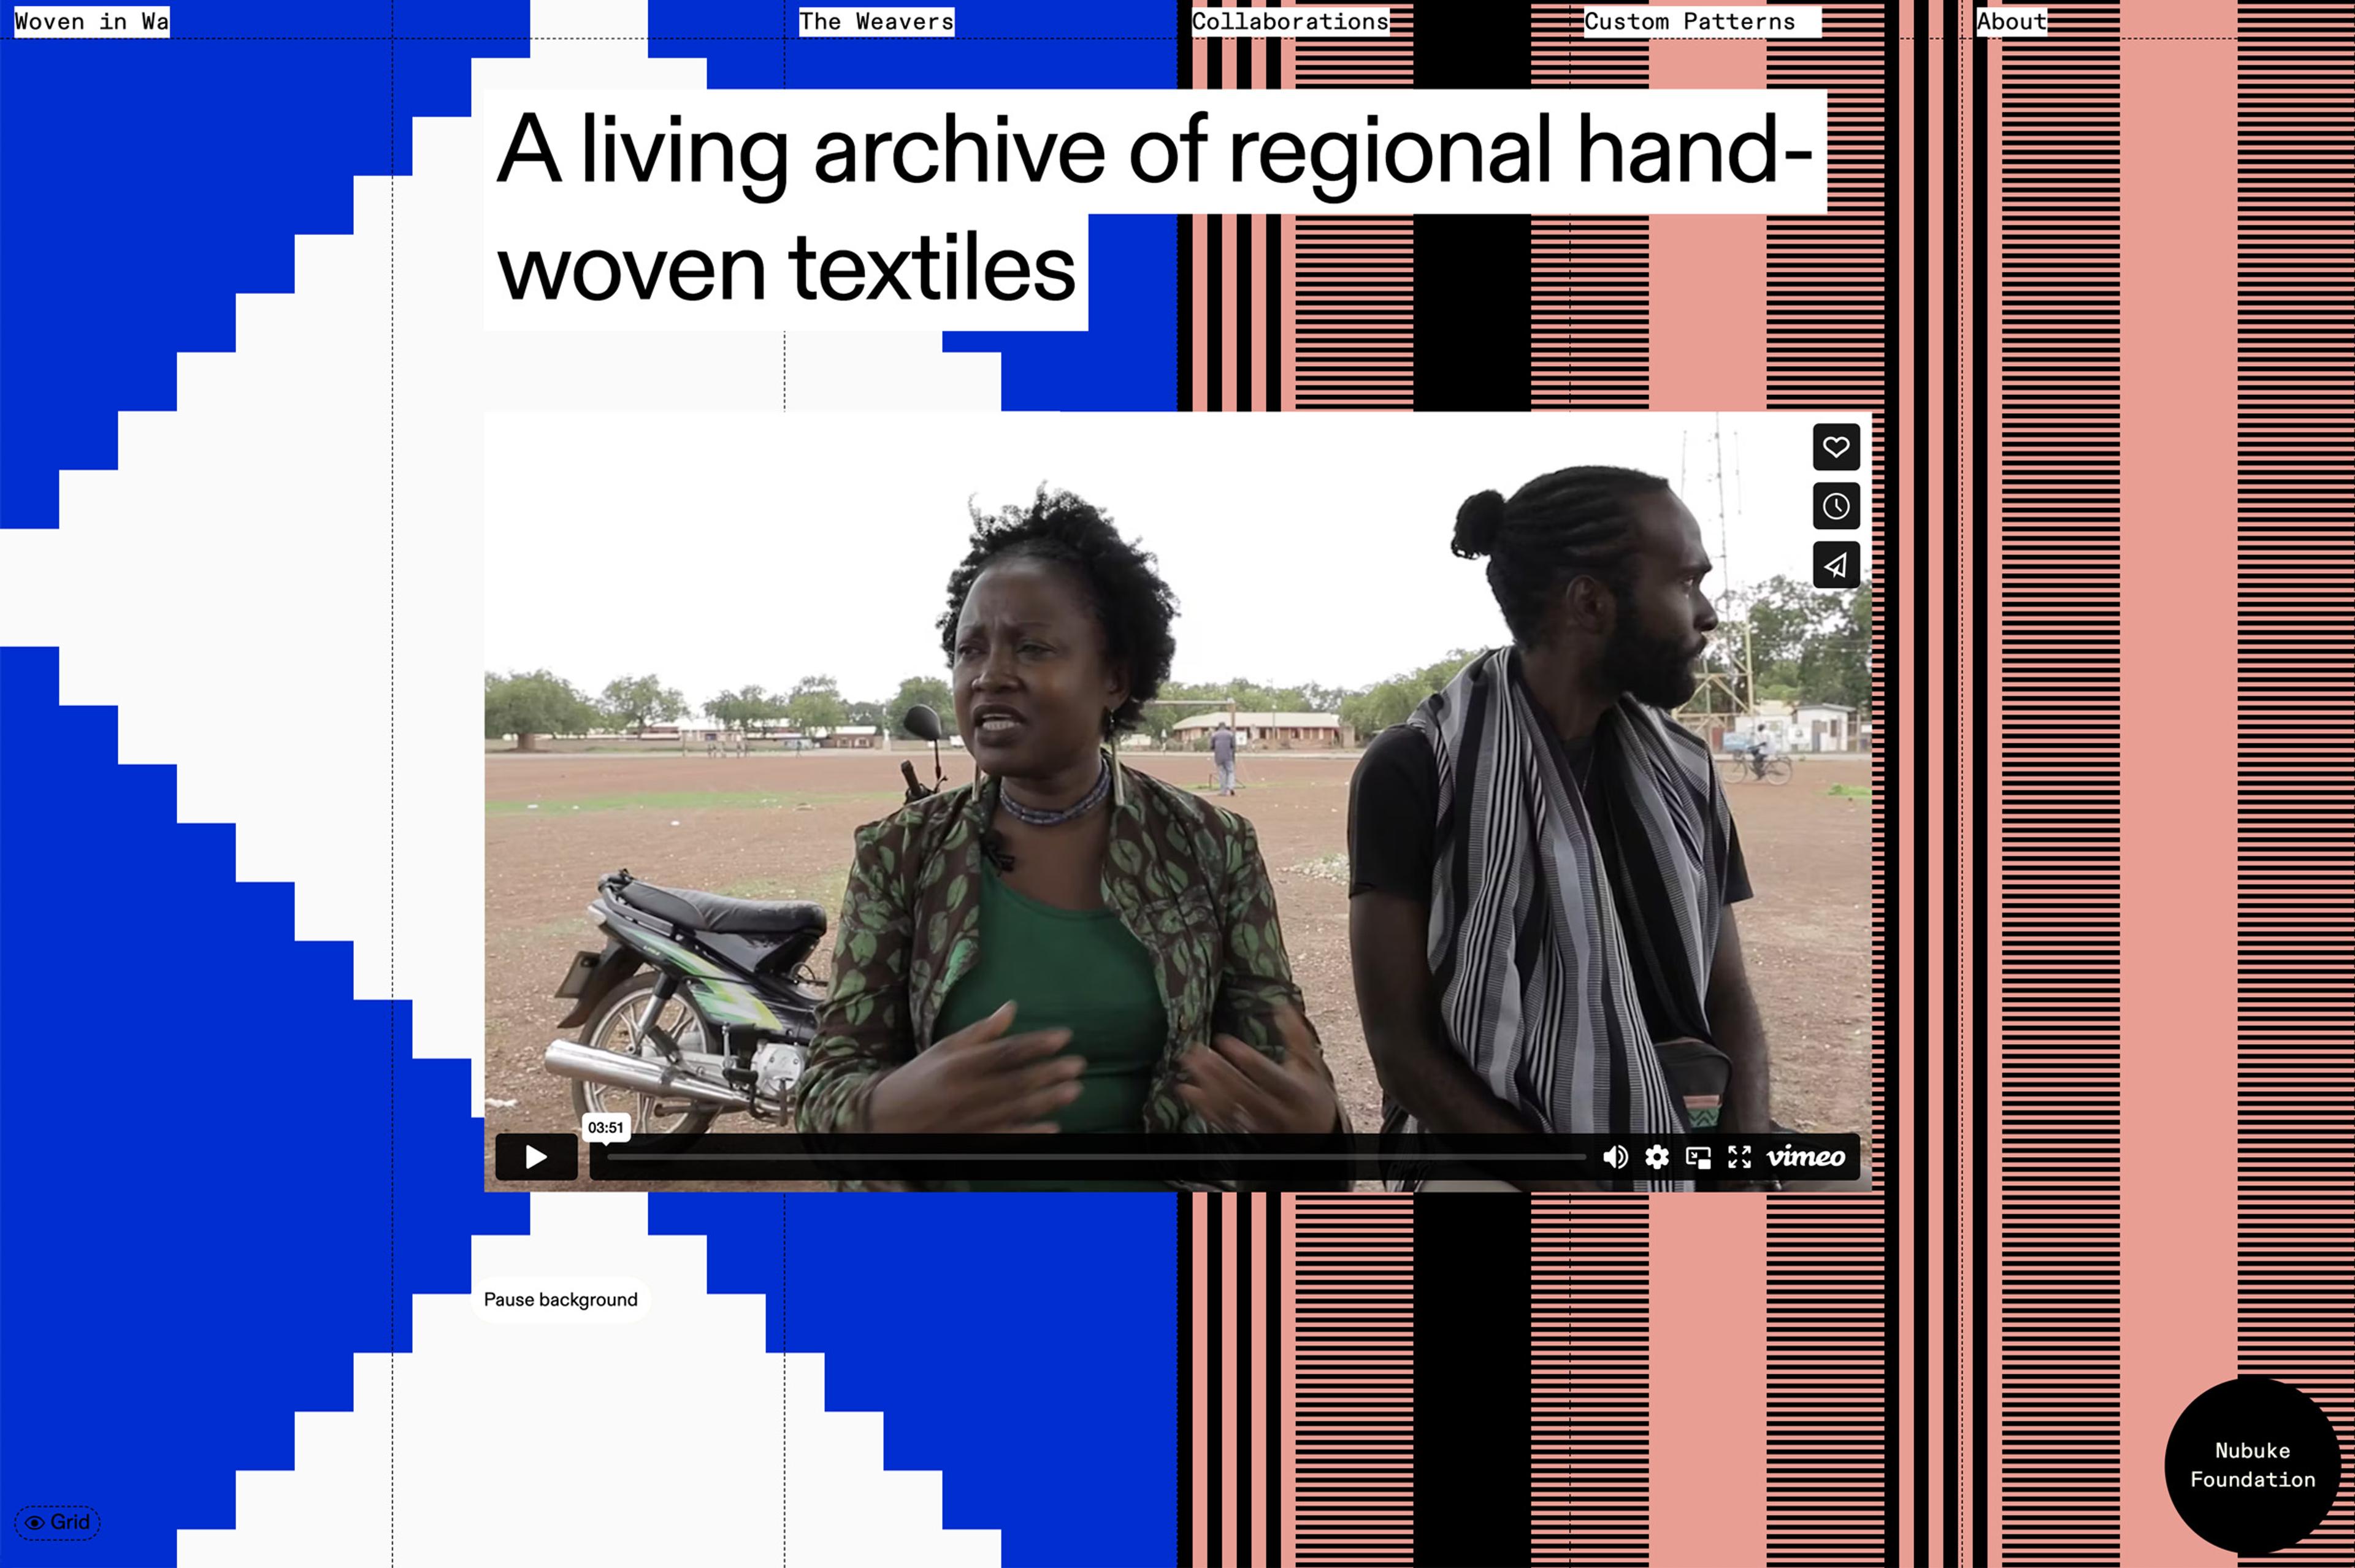 A screengrab from the homepage of the Woven in Wa website, showing a video on a pattern background in blue, pink and black